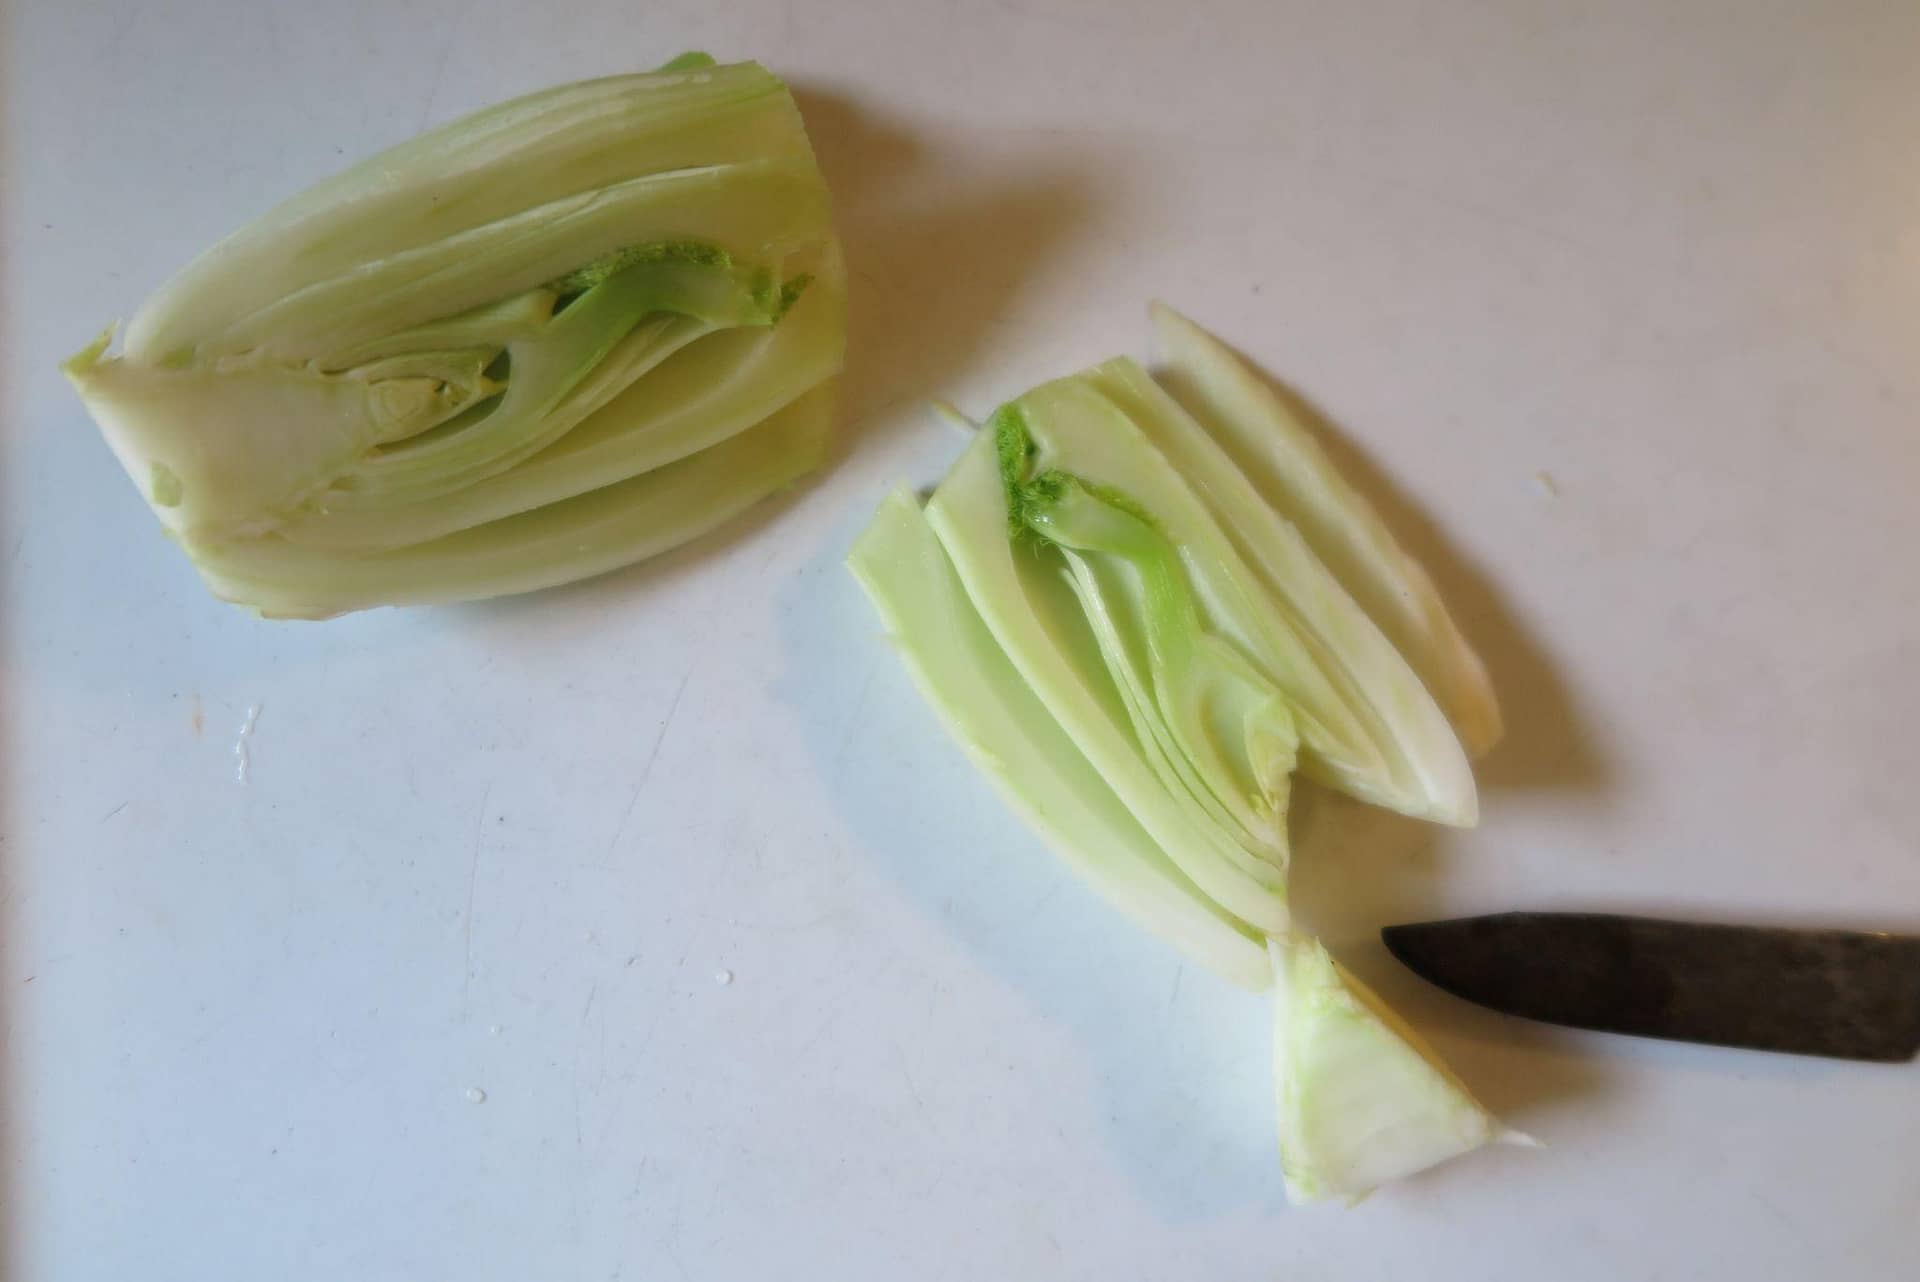 Fennel bulb sliced in half with a triangle notch cut out from the stem end